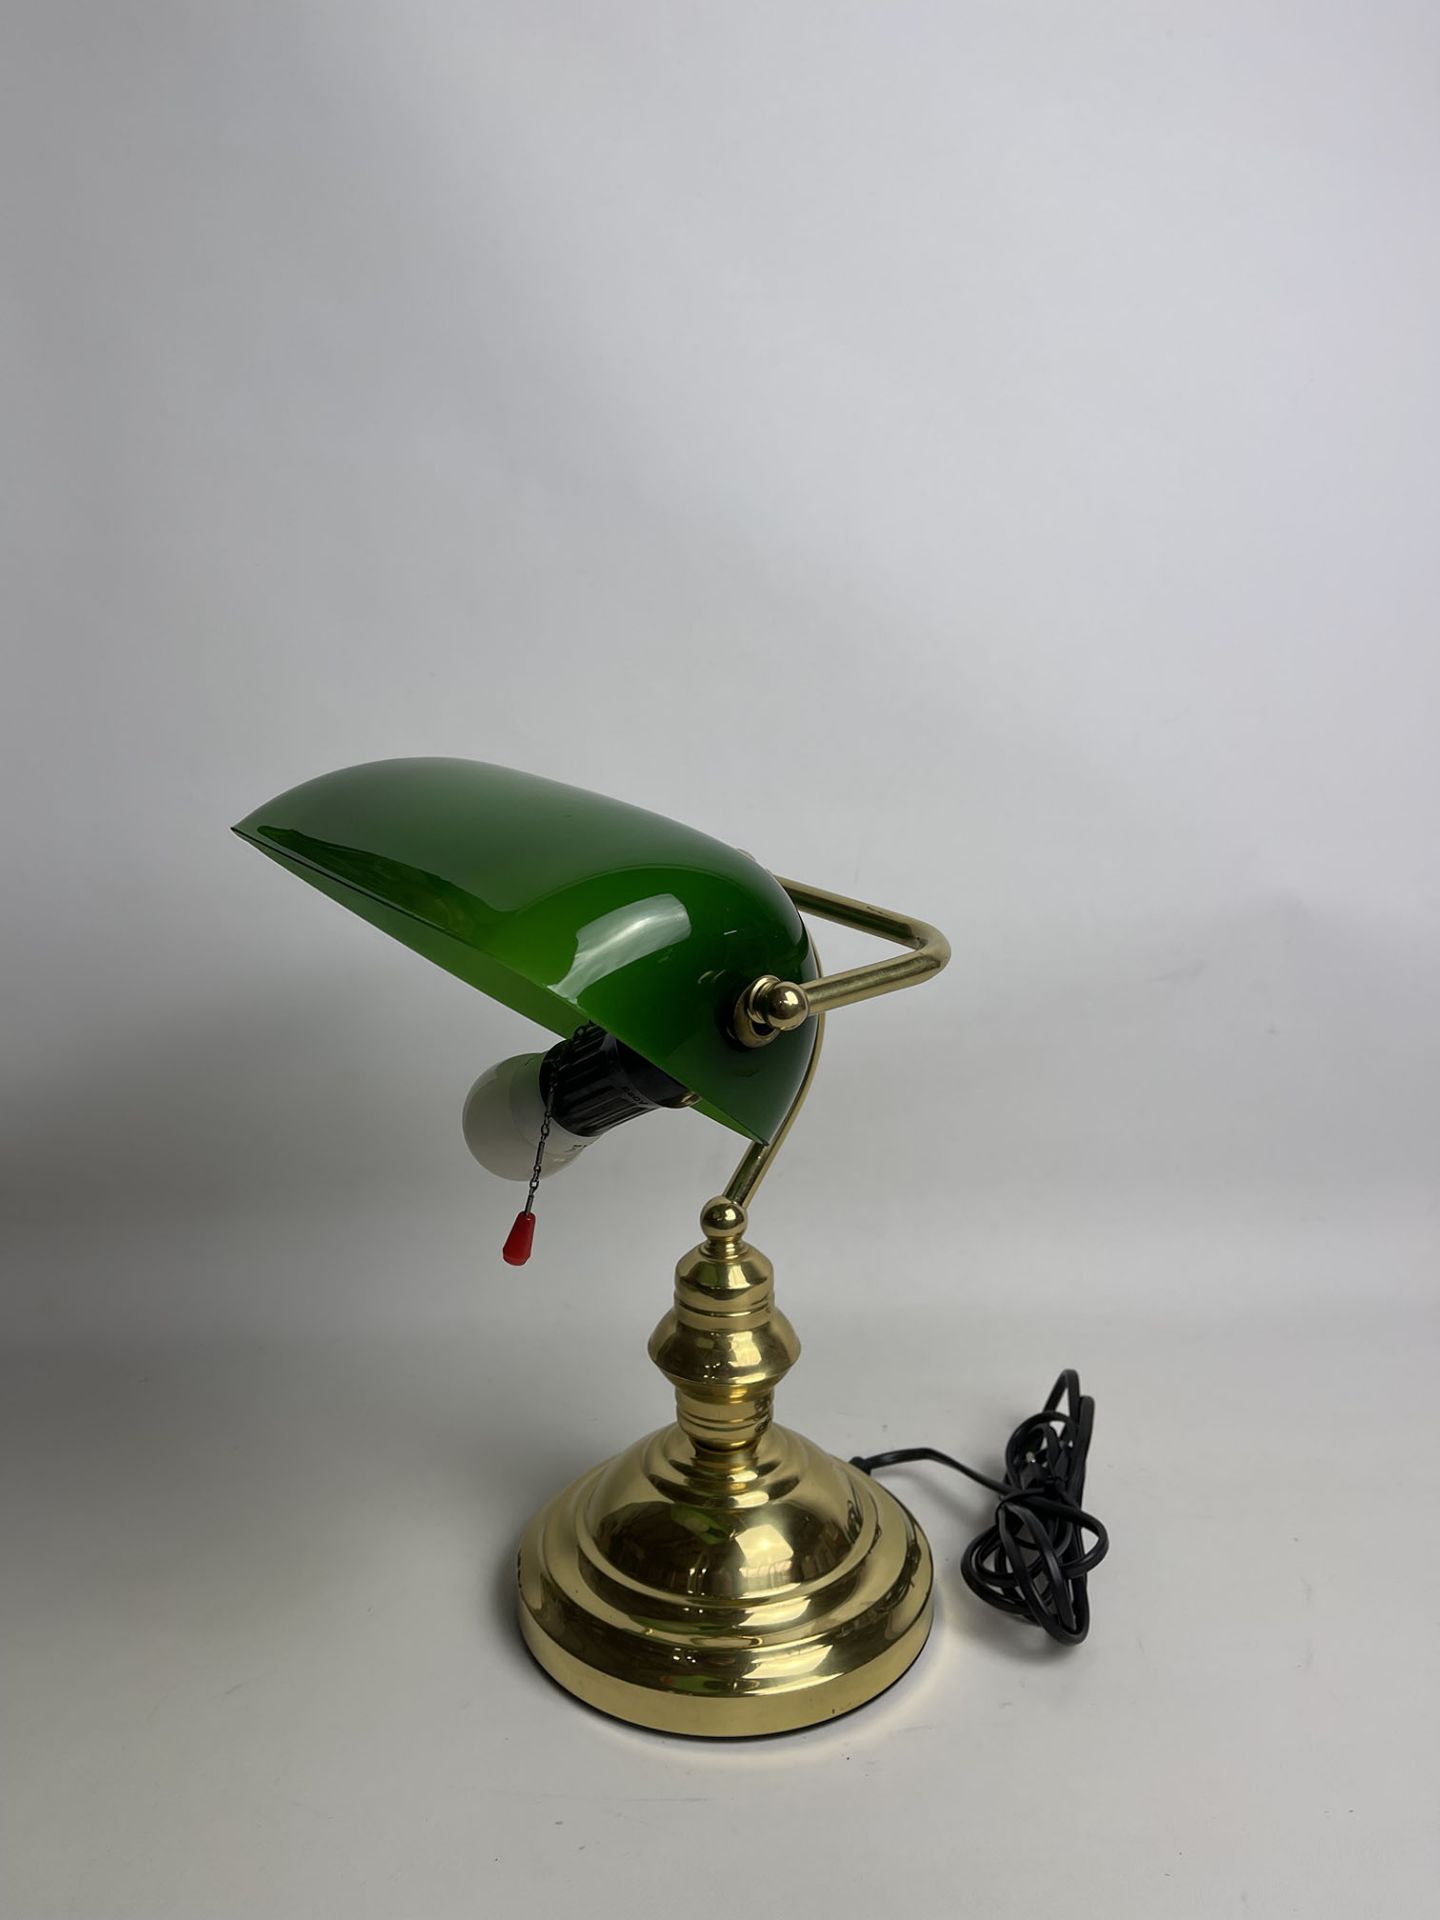 Vintage American Desk Lamp with Green Lamp Shade - Image 8 of 9